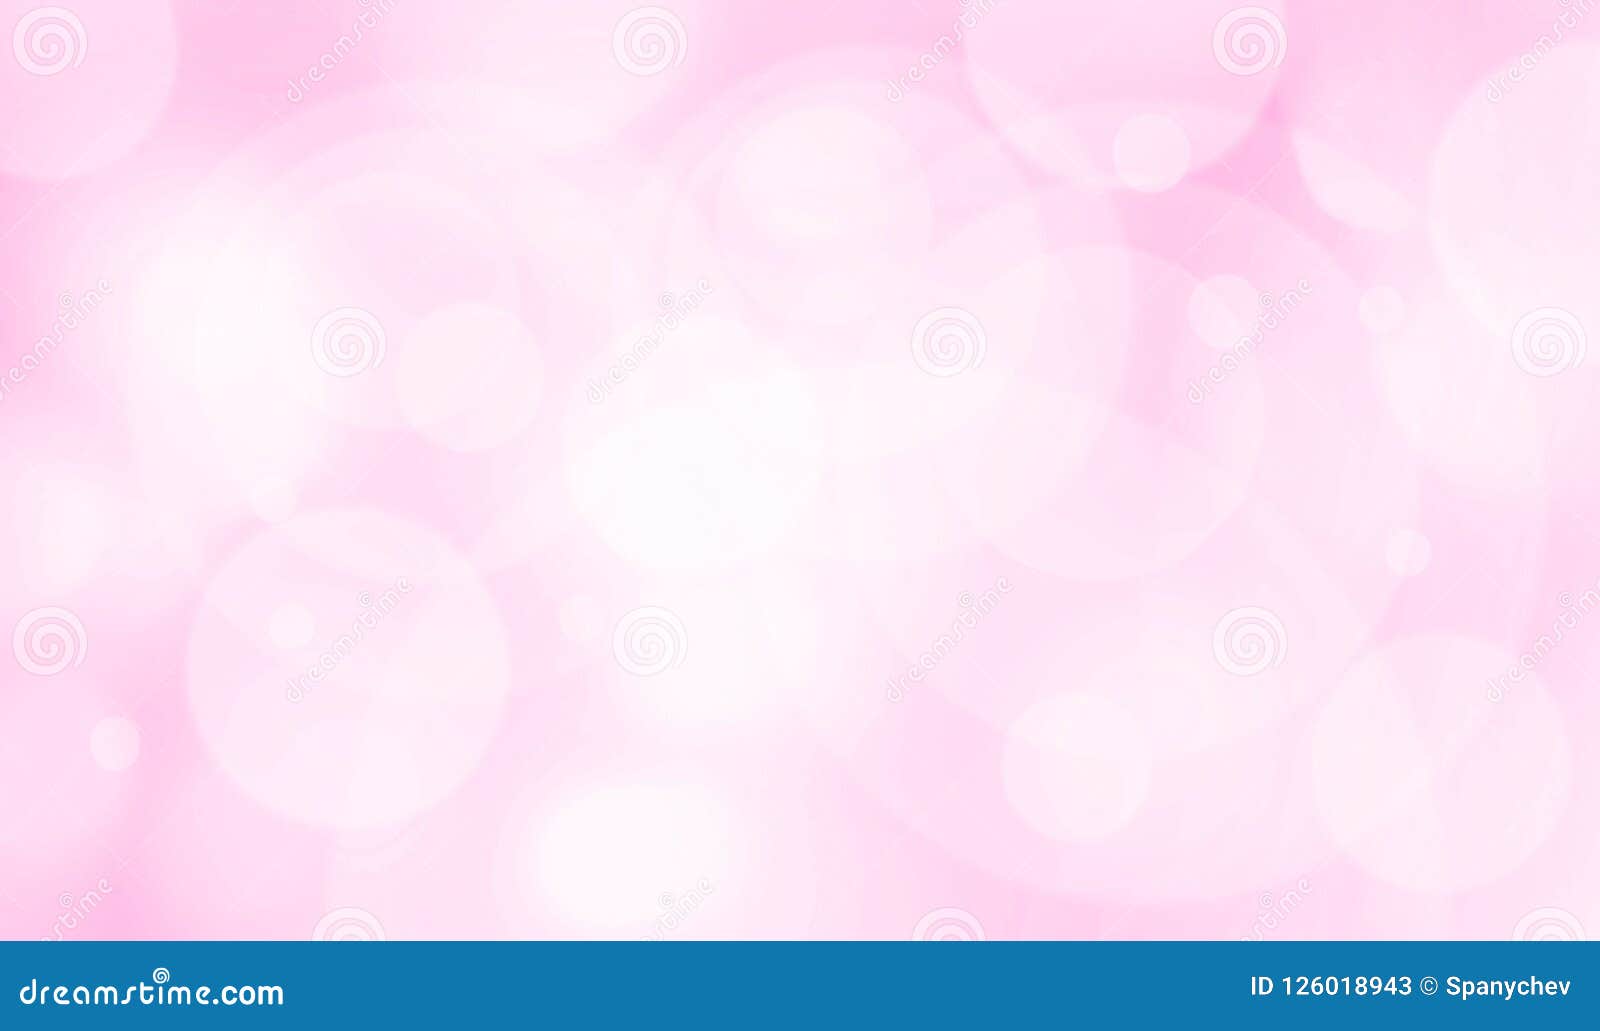 Blurred Pink Abstract Light Background Stock Illustration - Illustration of  background, element: 126018943